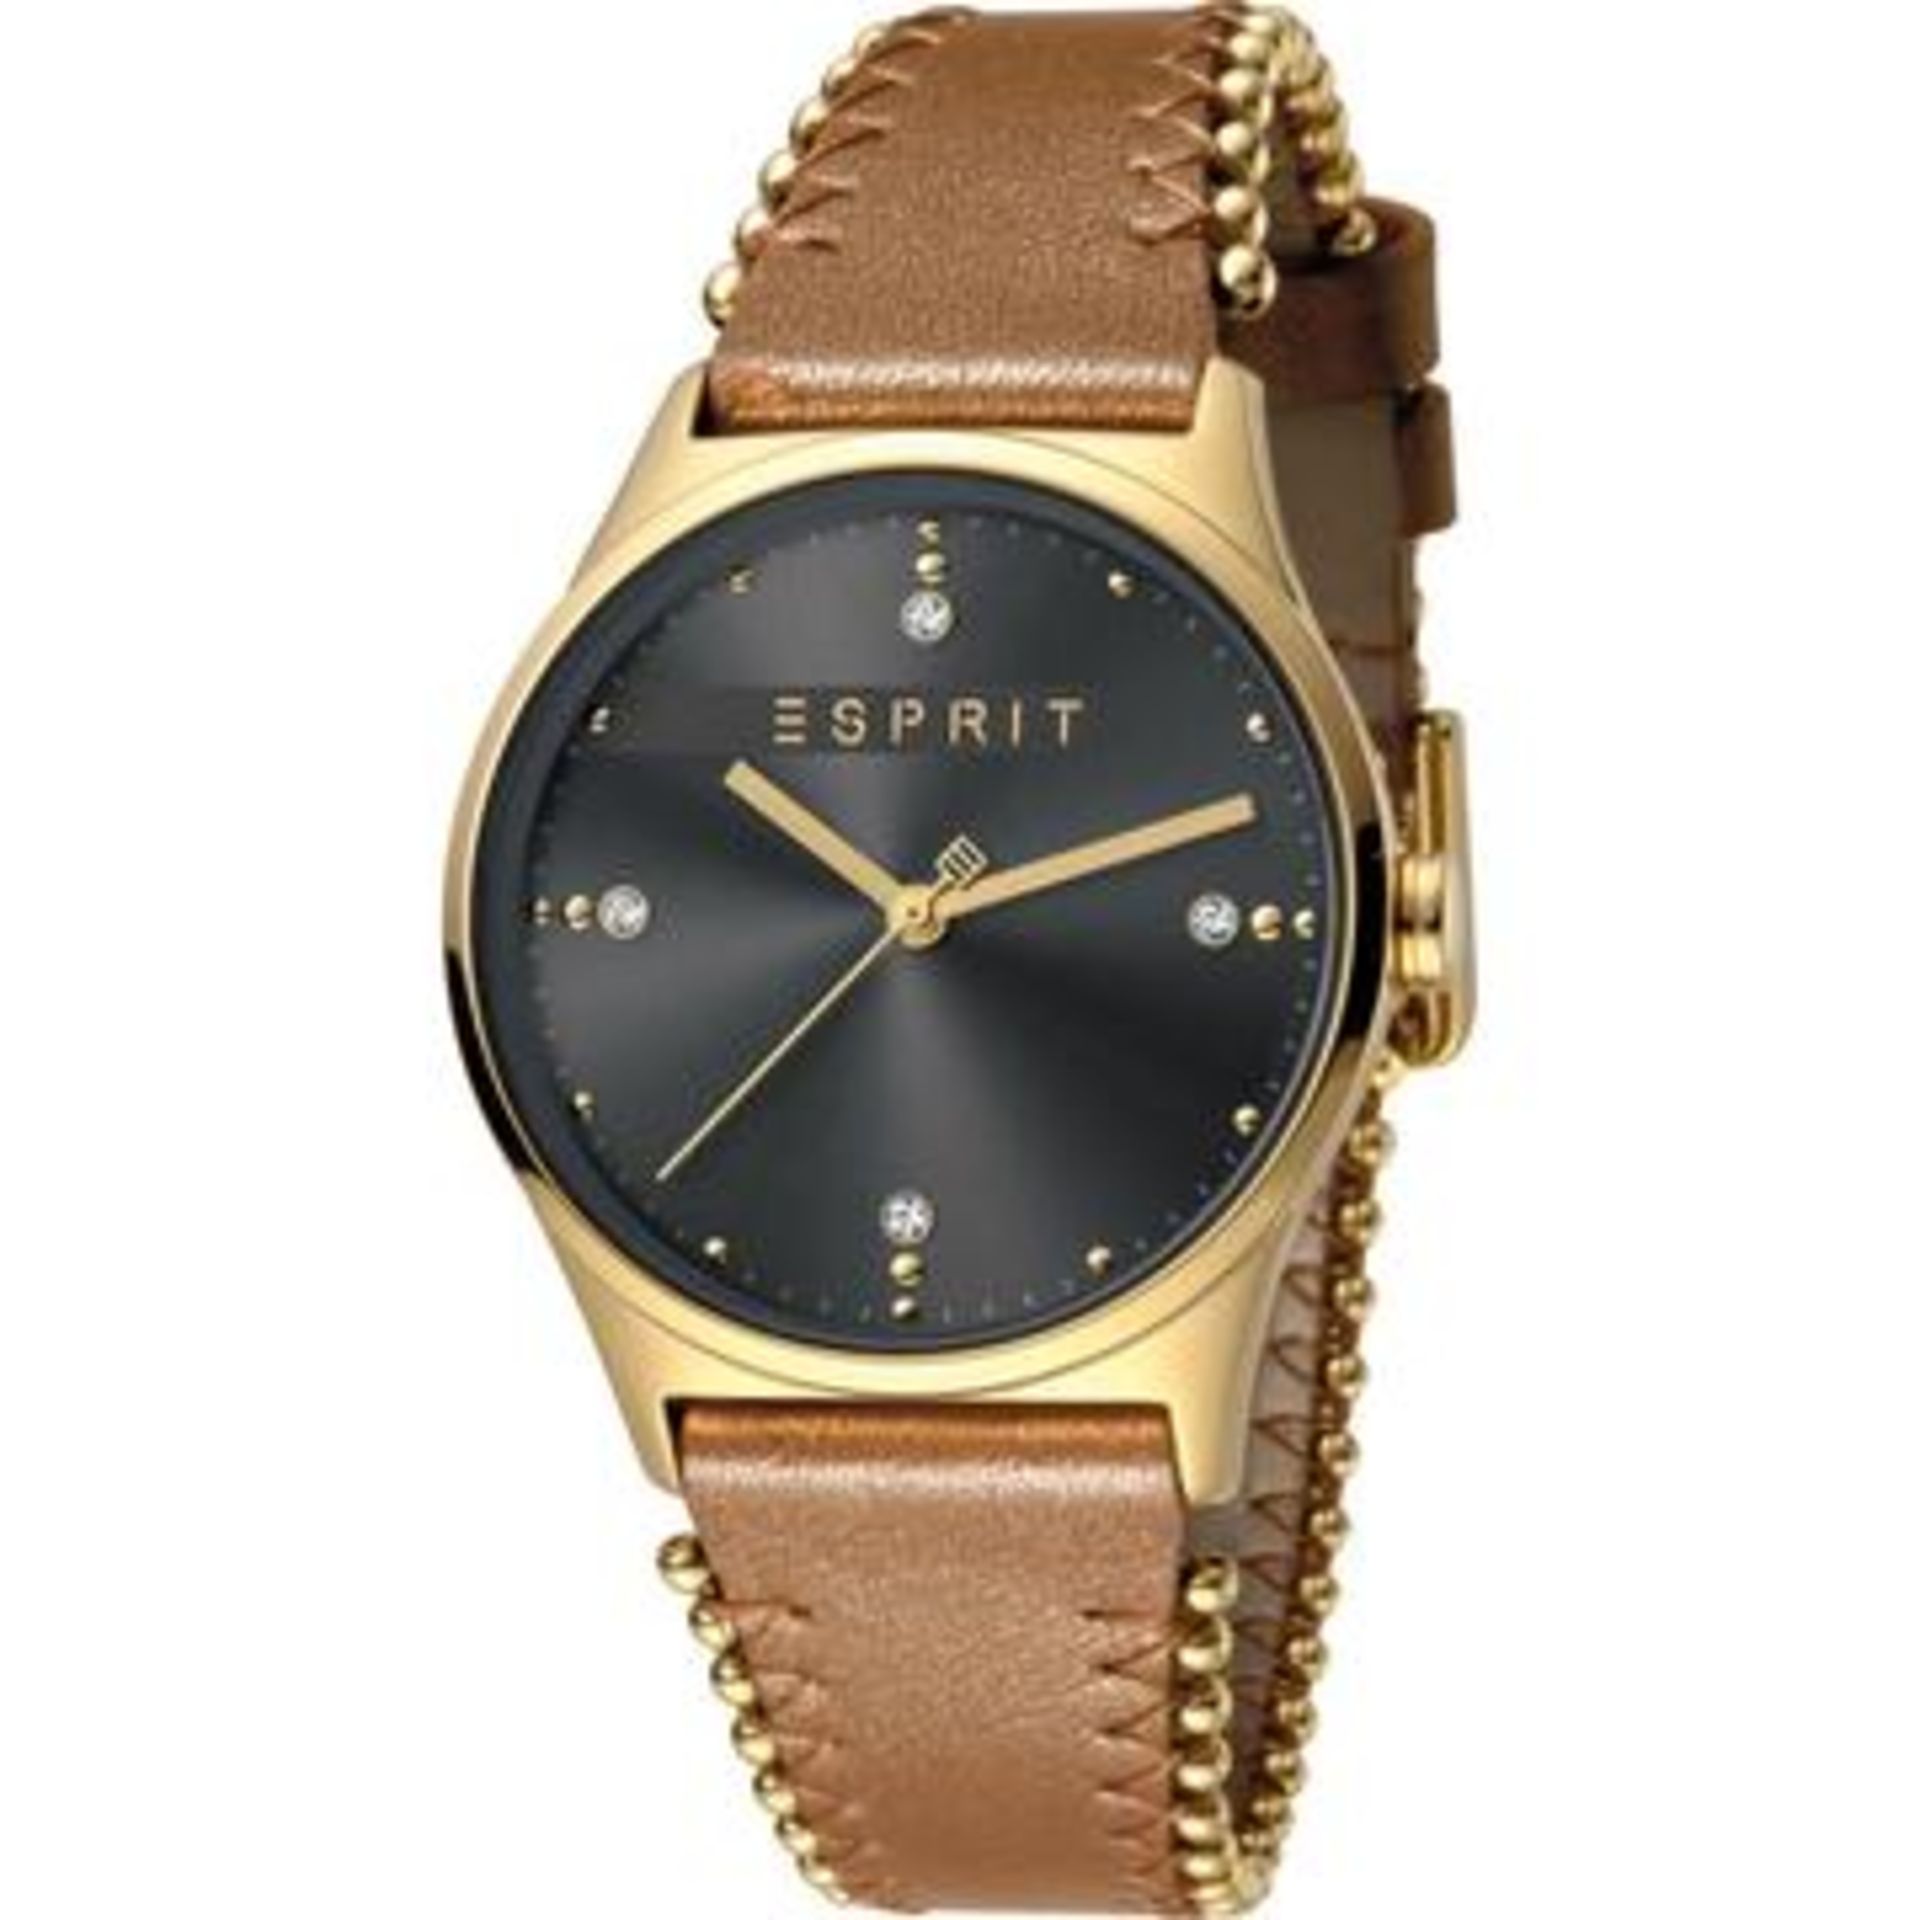 No VAT Brand New Esprit Ladies Watch ES1L032L0035 - Real Leather Strap - Gold Plated Casing - 30m - Image 2 of 4